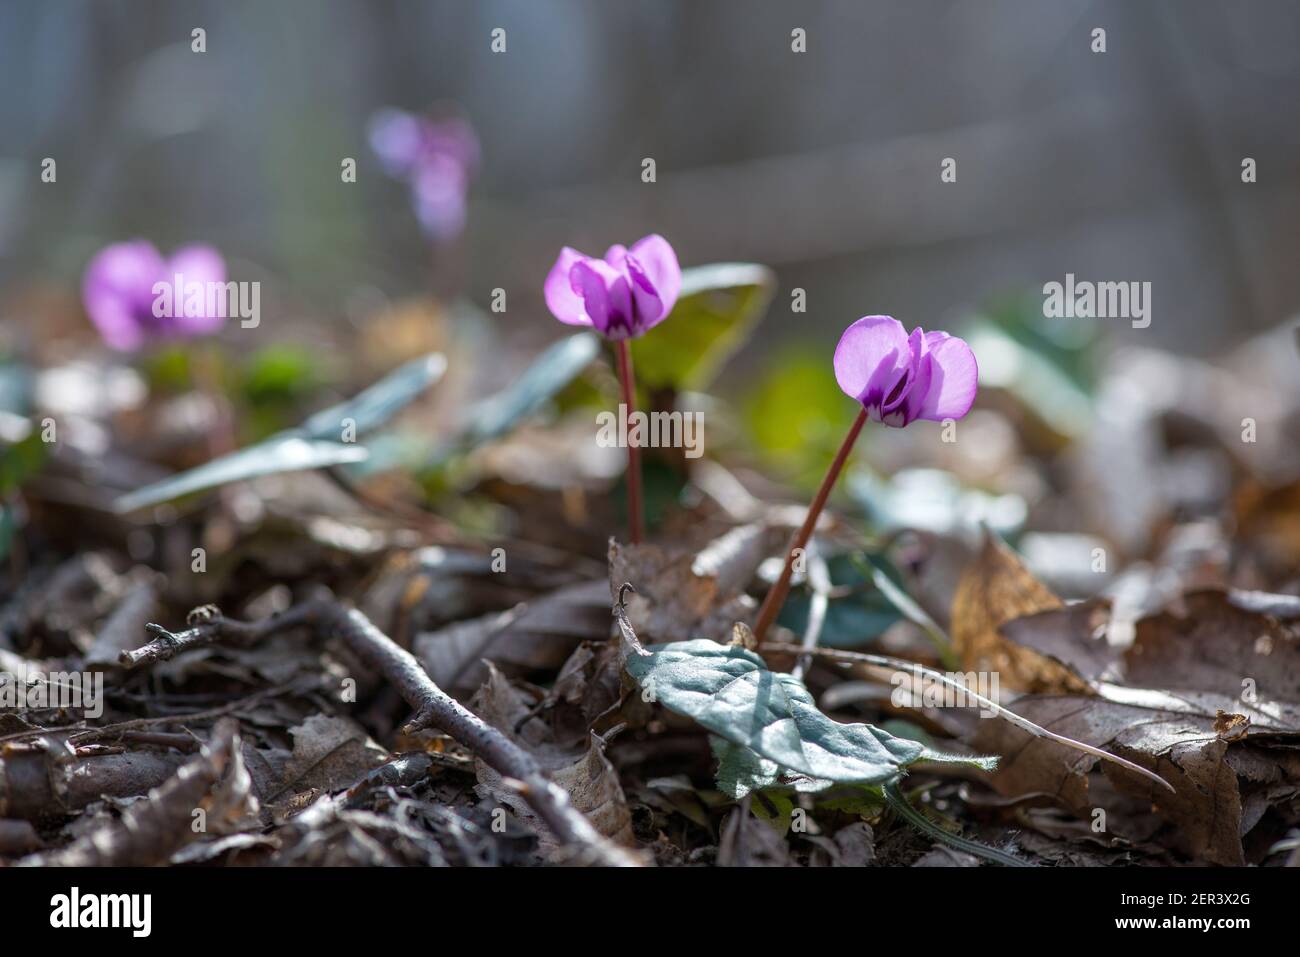 Clouse-up of spring blooms of pink cyclamens  in the forest. Primroses. . Cyclamen hederifolium ( ivy-leaved cyclamen or sowbread ) Stock Photo